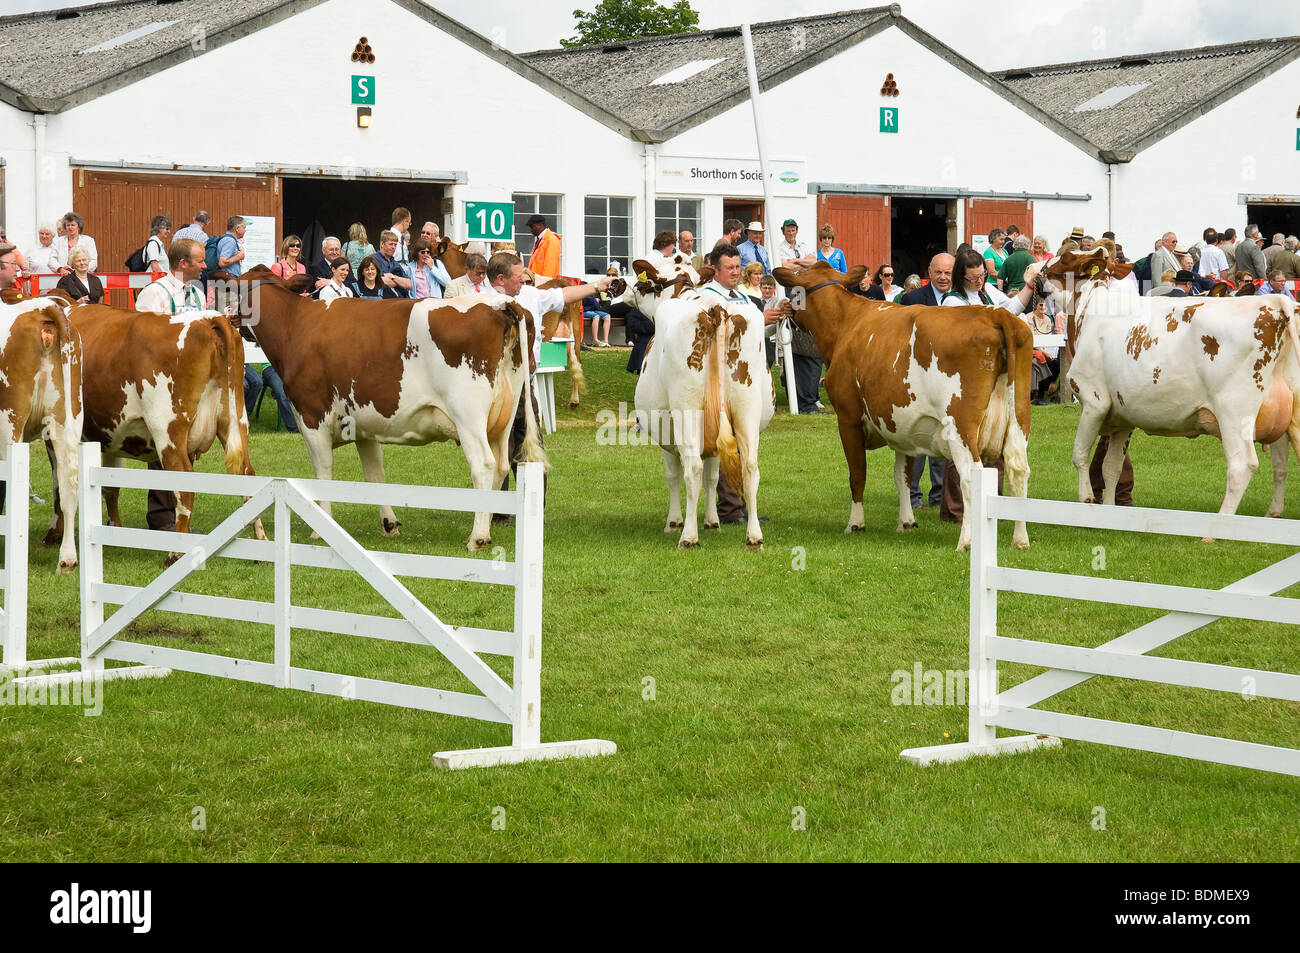 Ayrshire cattle cow cows  being judged at the Great Yorkshire Show in summer Harrogate North Yorkshire England UK United Kingdom GB Great Britain Stock Photo